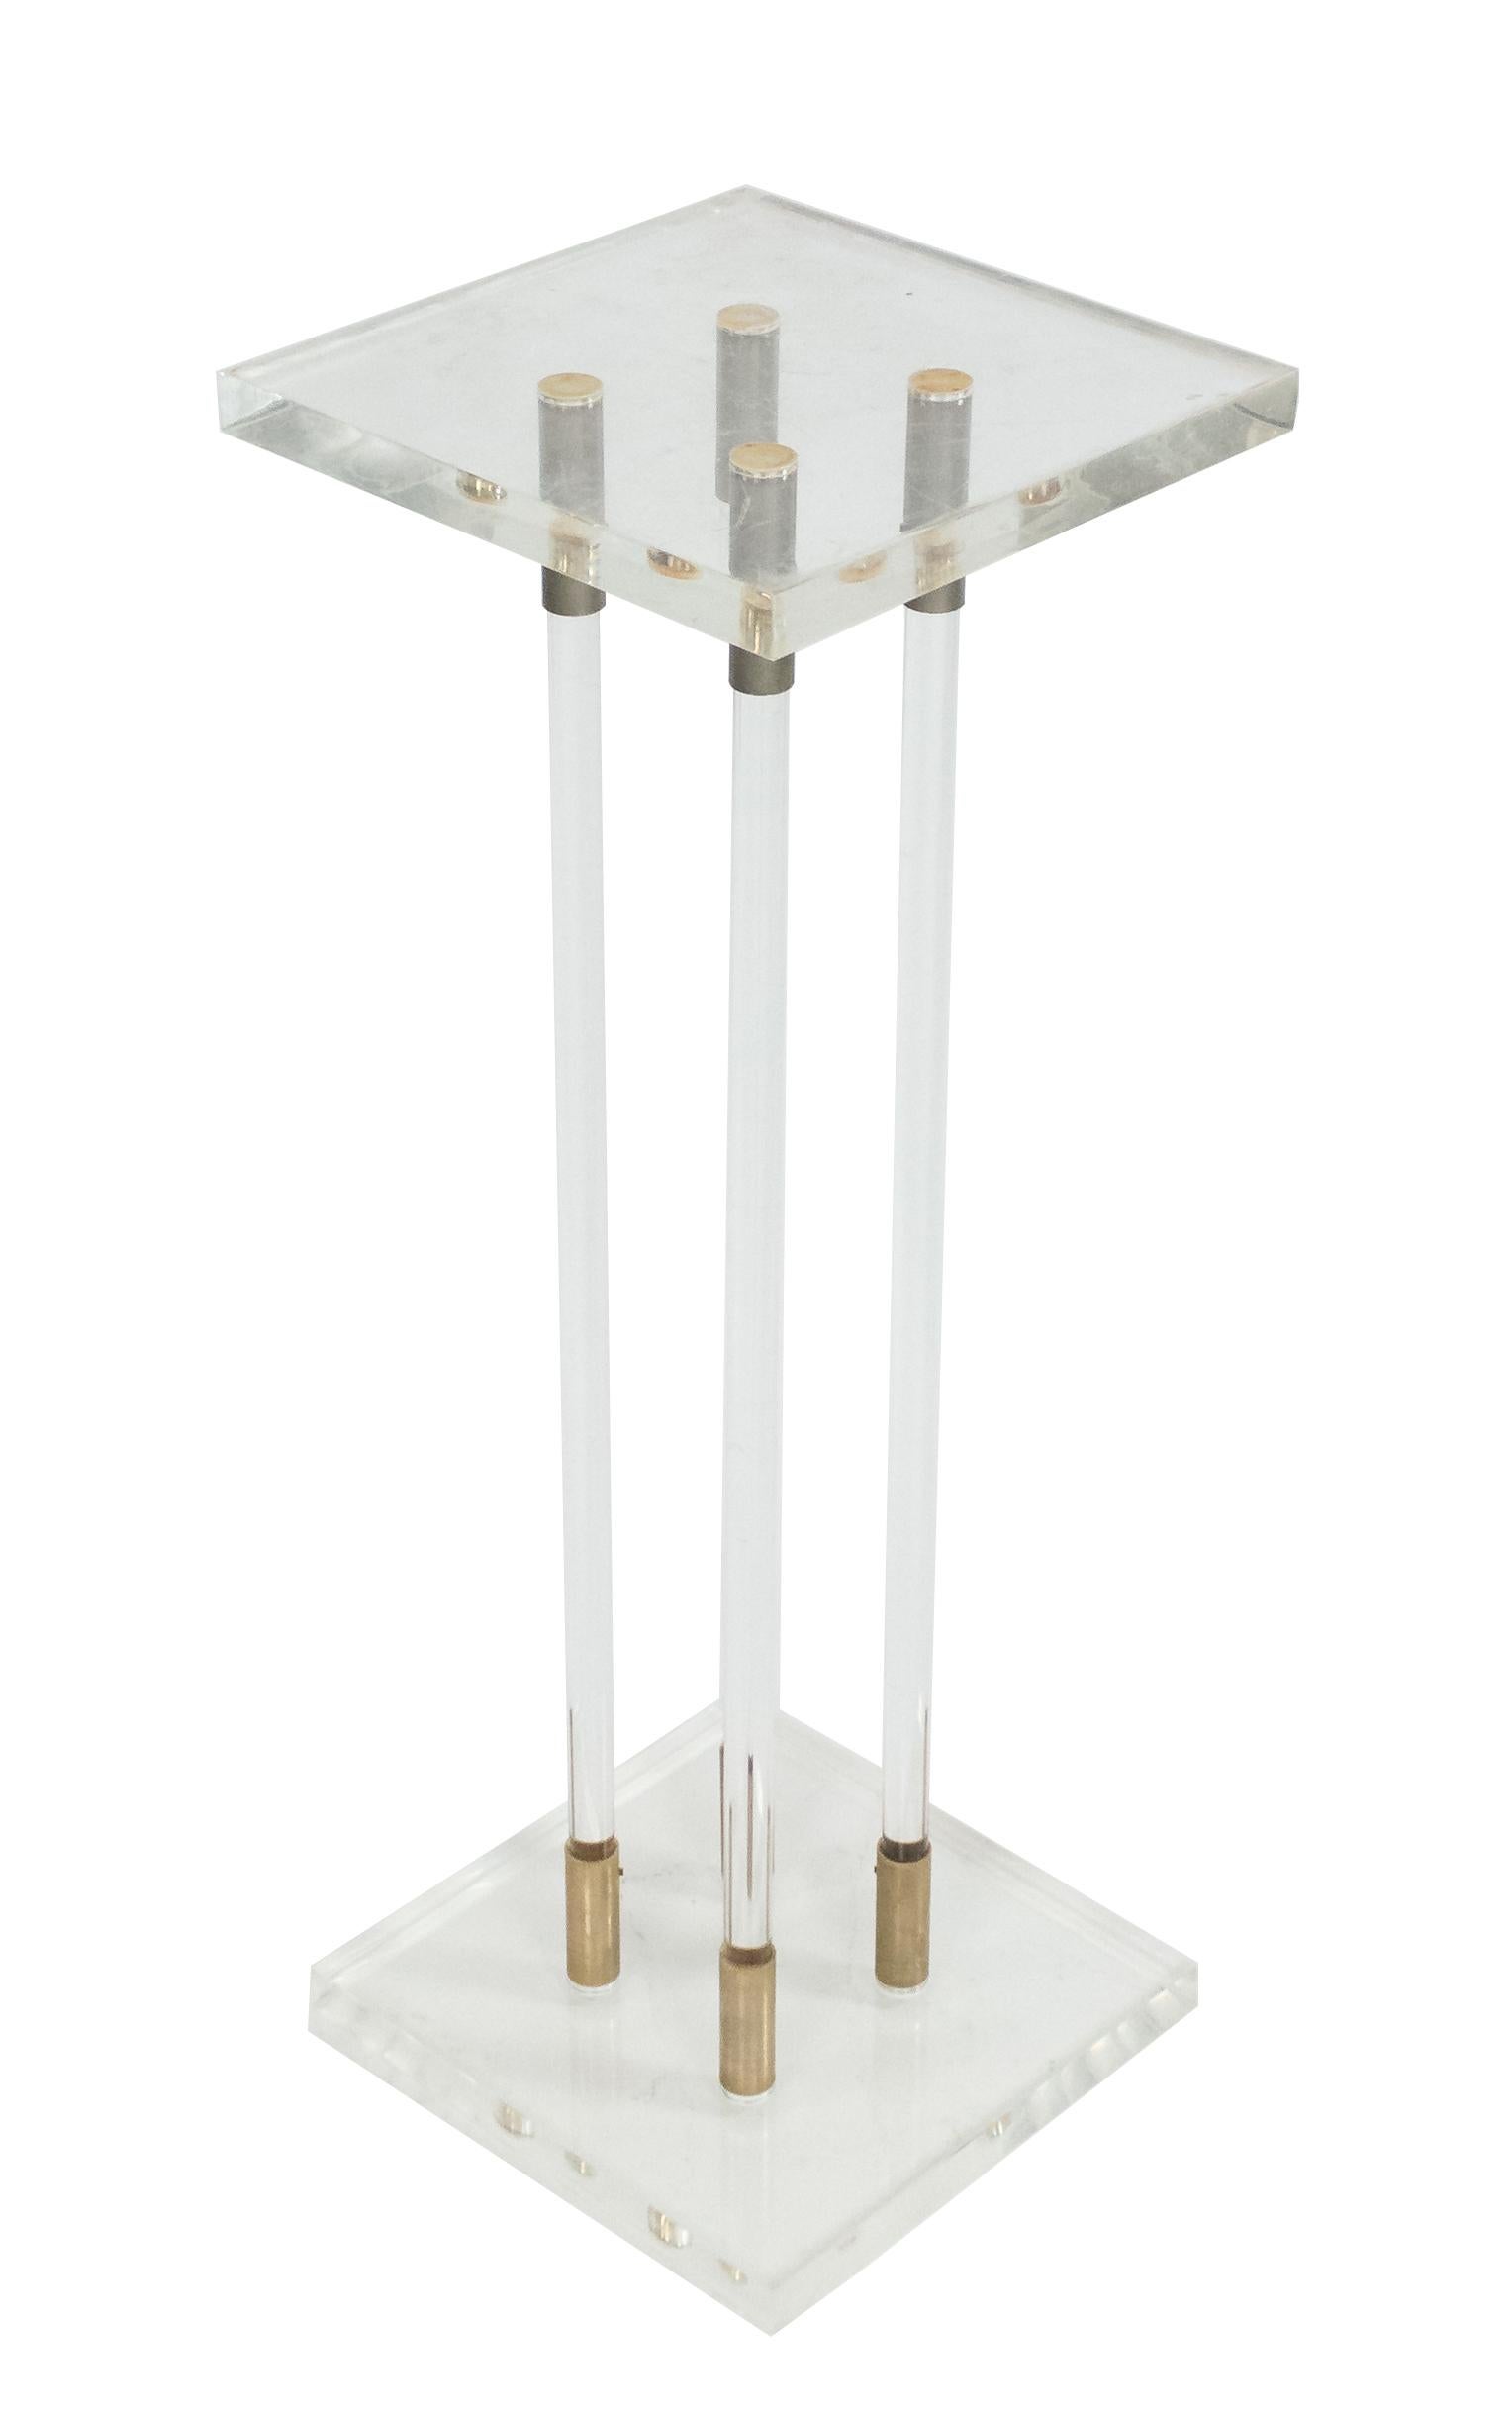 Pair of contemporary Lucite pedestals with four Lucite supports, gilt metal details, and square bases and tops.